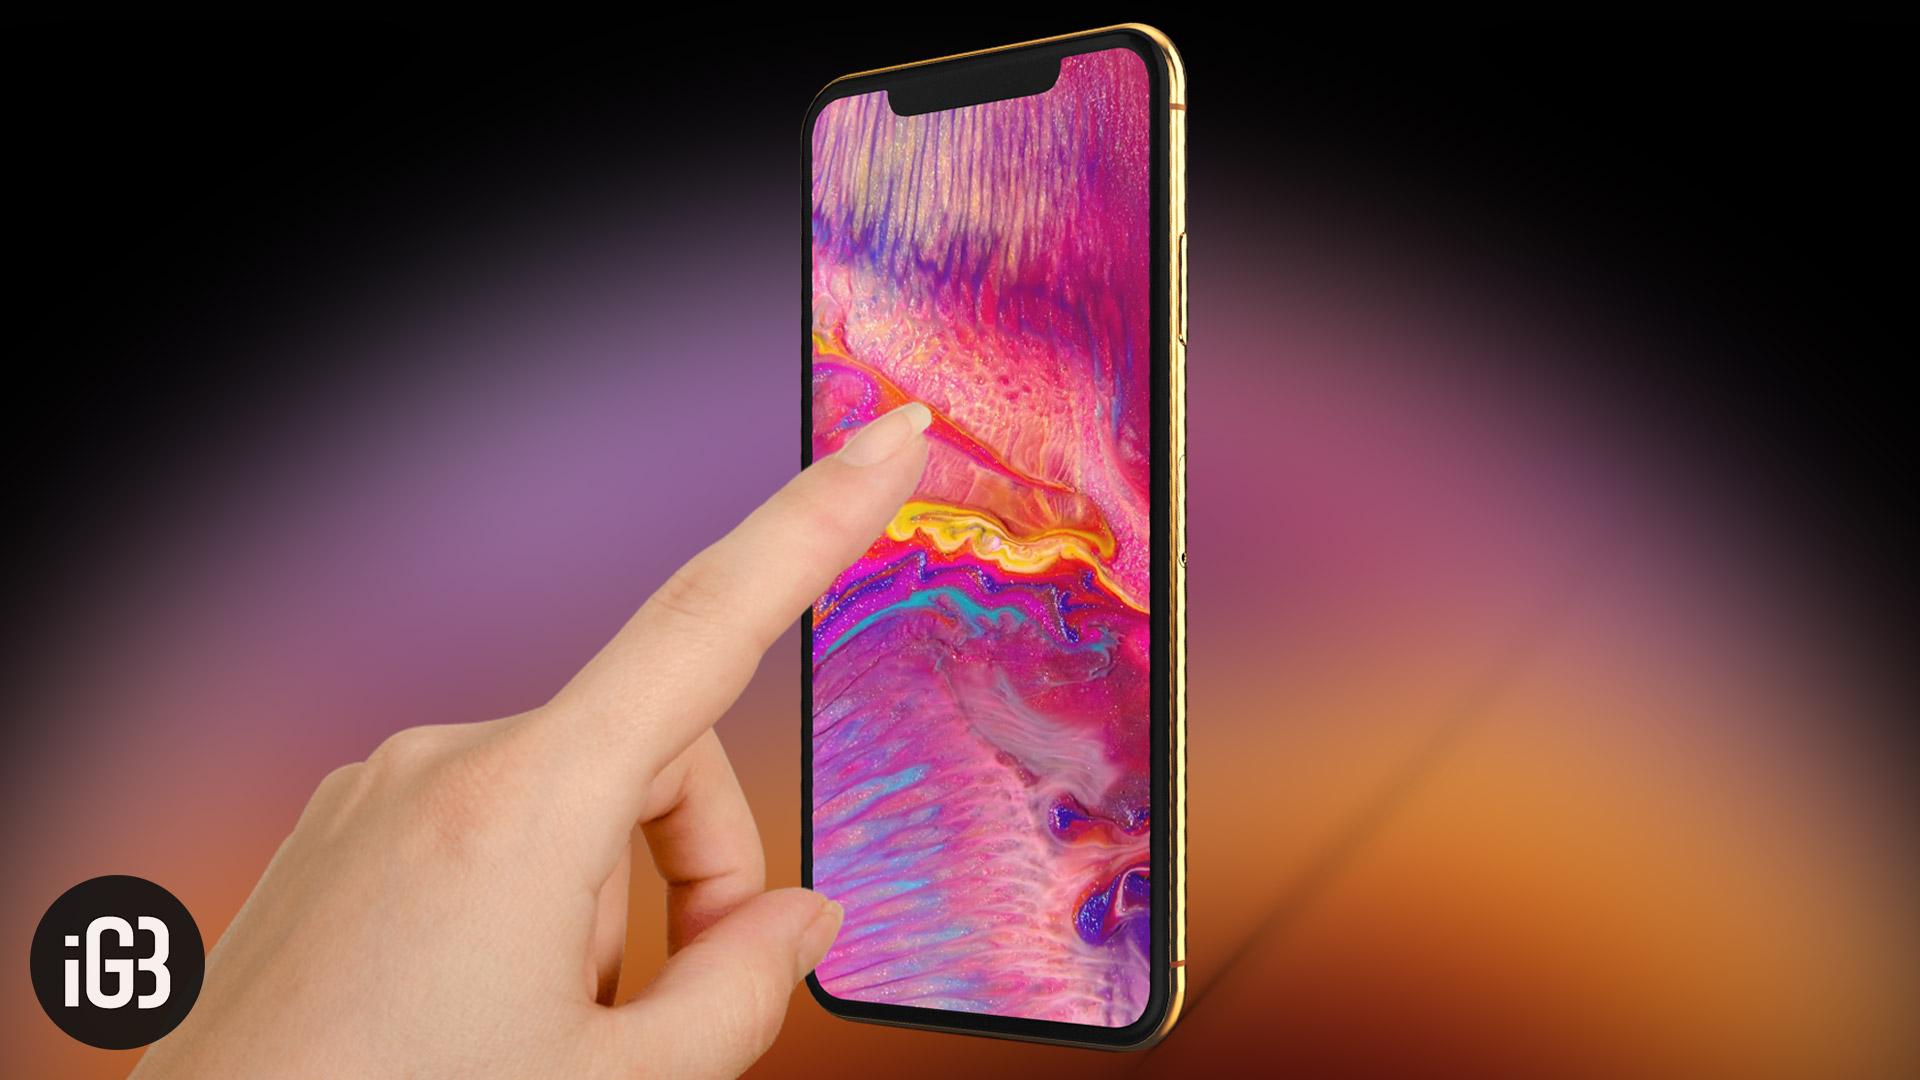 Best Live Wallpapers Apps for iPhone Xs and Xs Max in 2020.